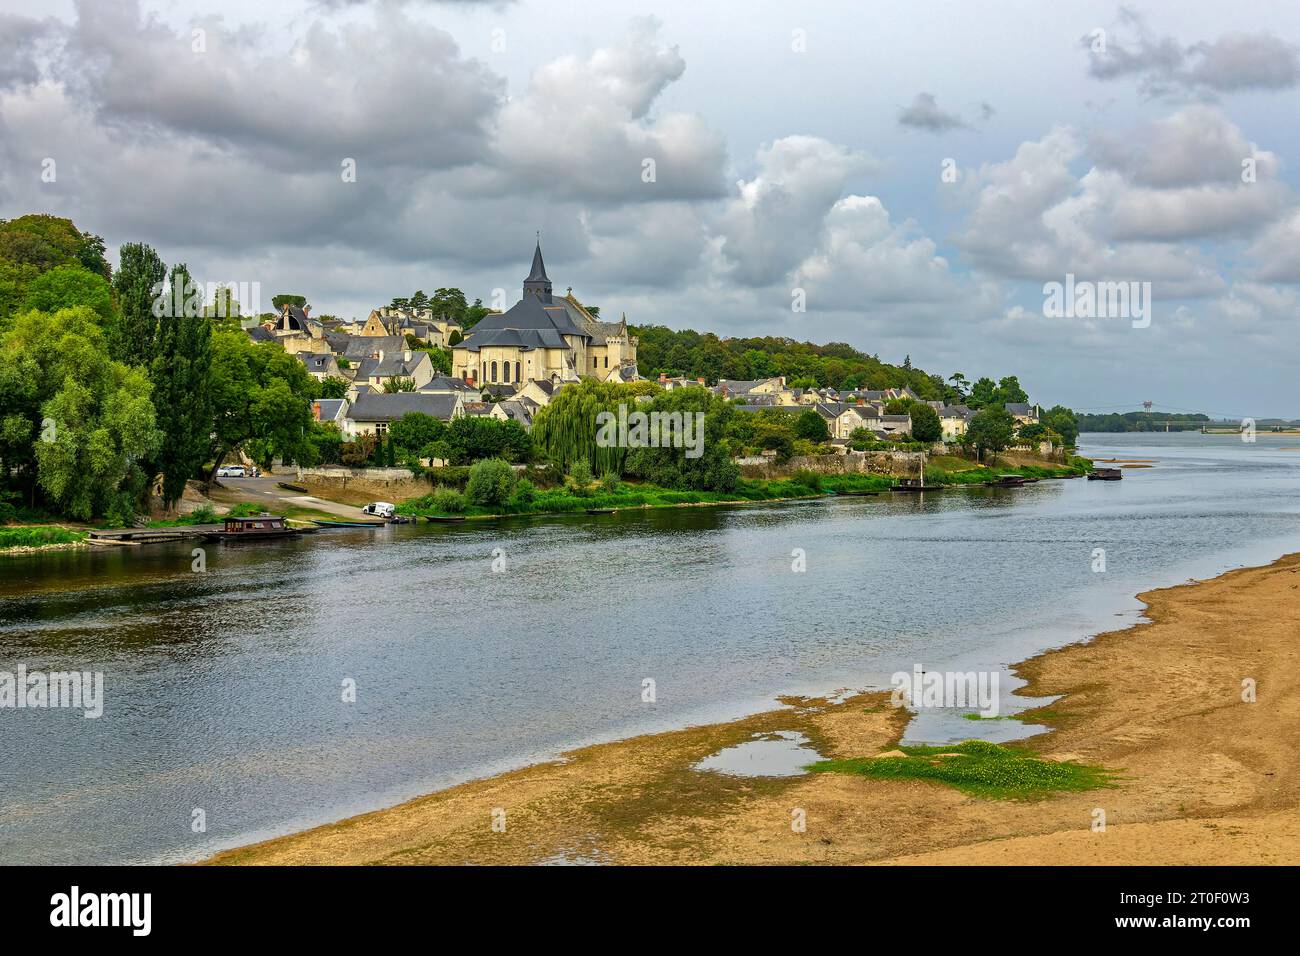 View over the Vienne near Candes-Saint-Martin to the pilgrimage church St. Martin. The municipality of Candes-Saint-Martin is located directly at the mouth of the Vienne into the Loire. Stock Photo